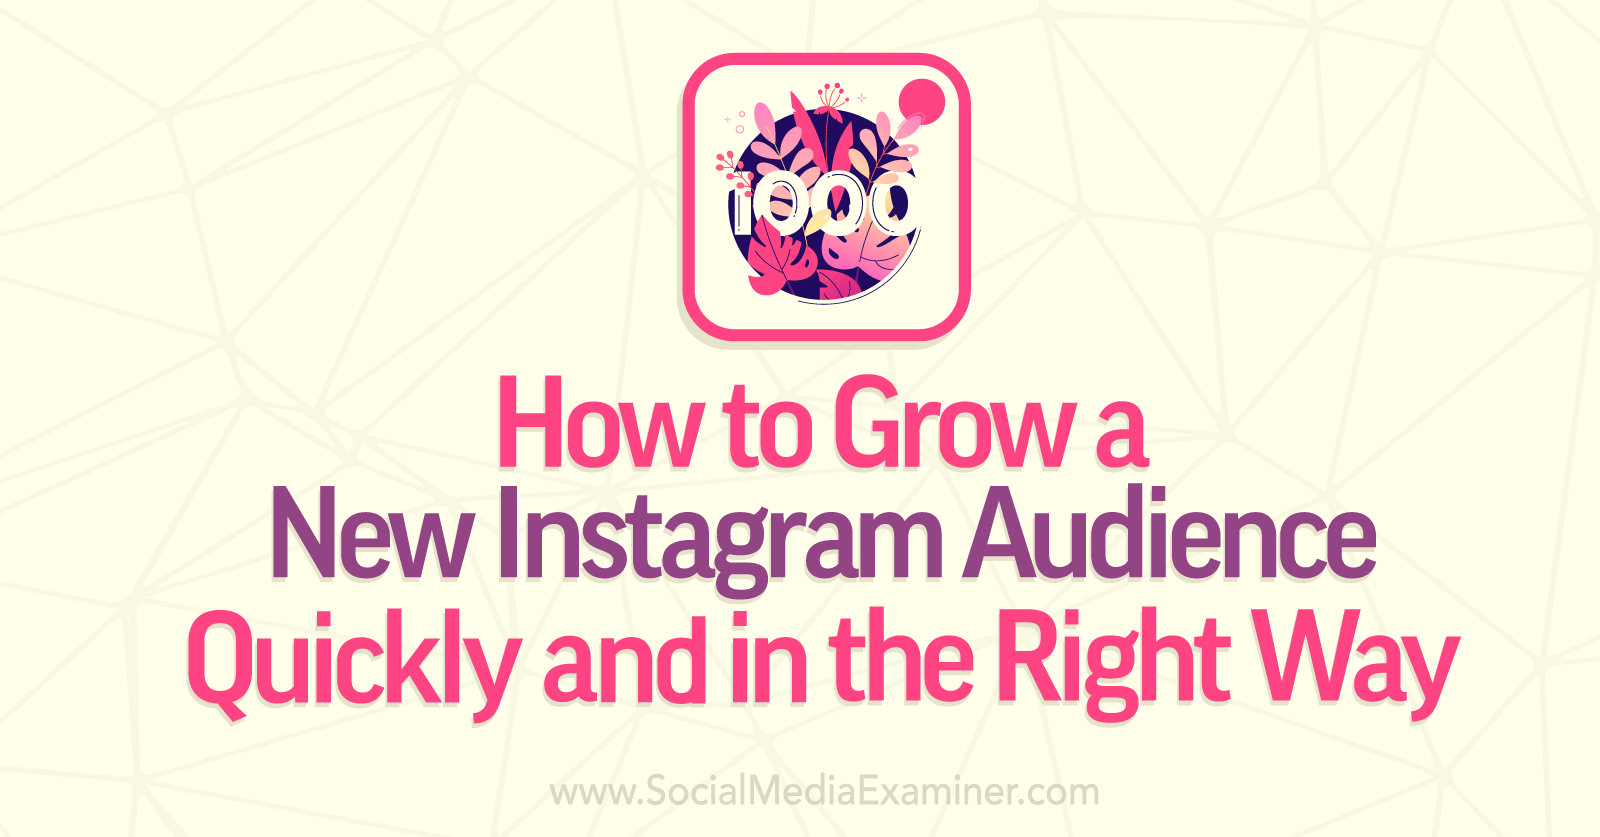 How to Grow a New Instagram Audience Quickly and in the Right Way by Social Media Examiner